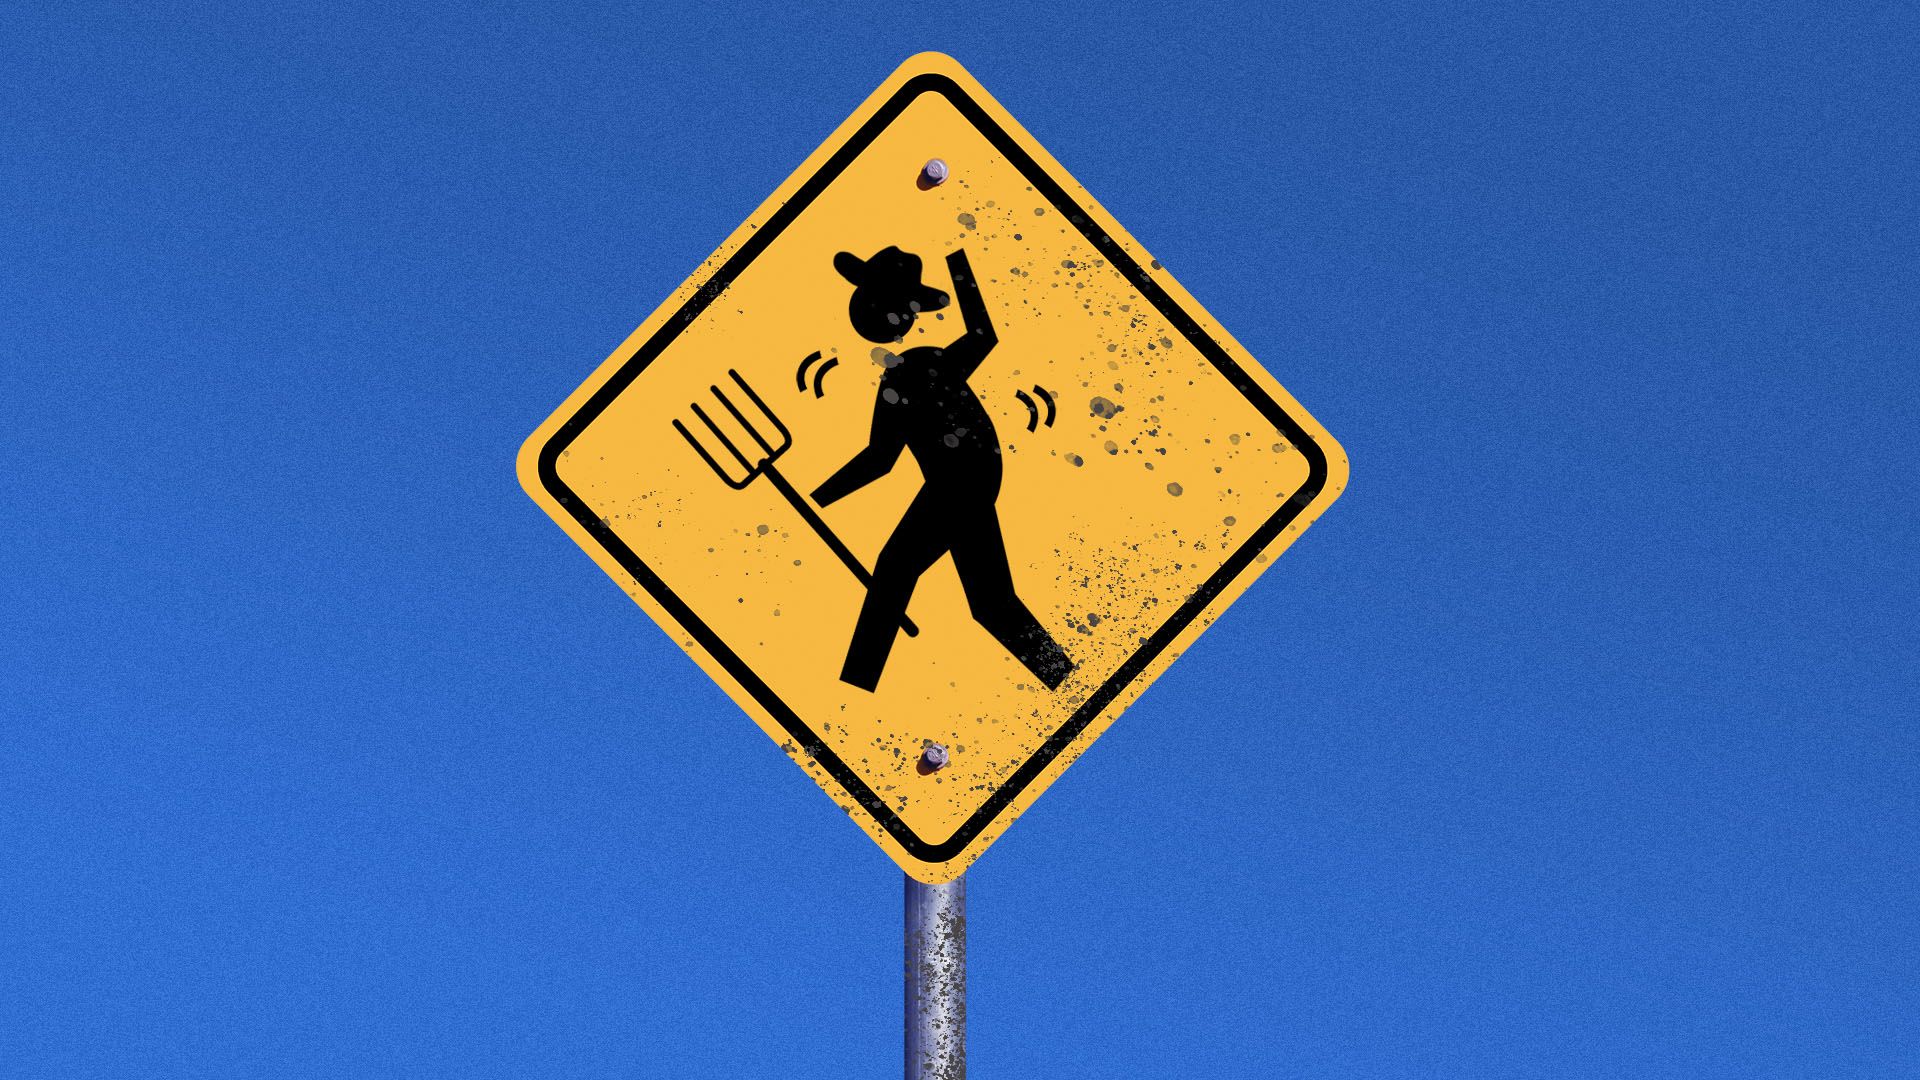 Illustration of a mud-covered street sign featured a struggling farmer icon